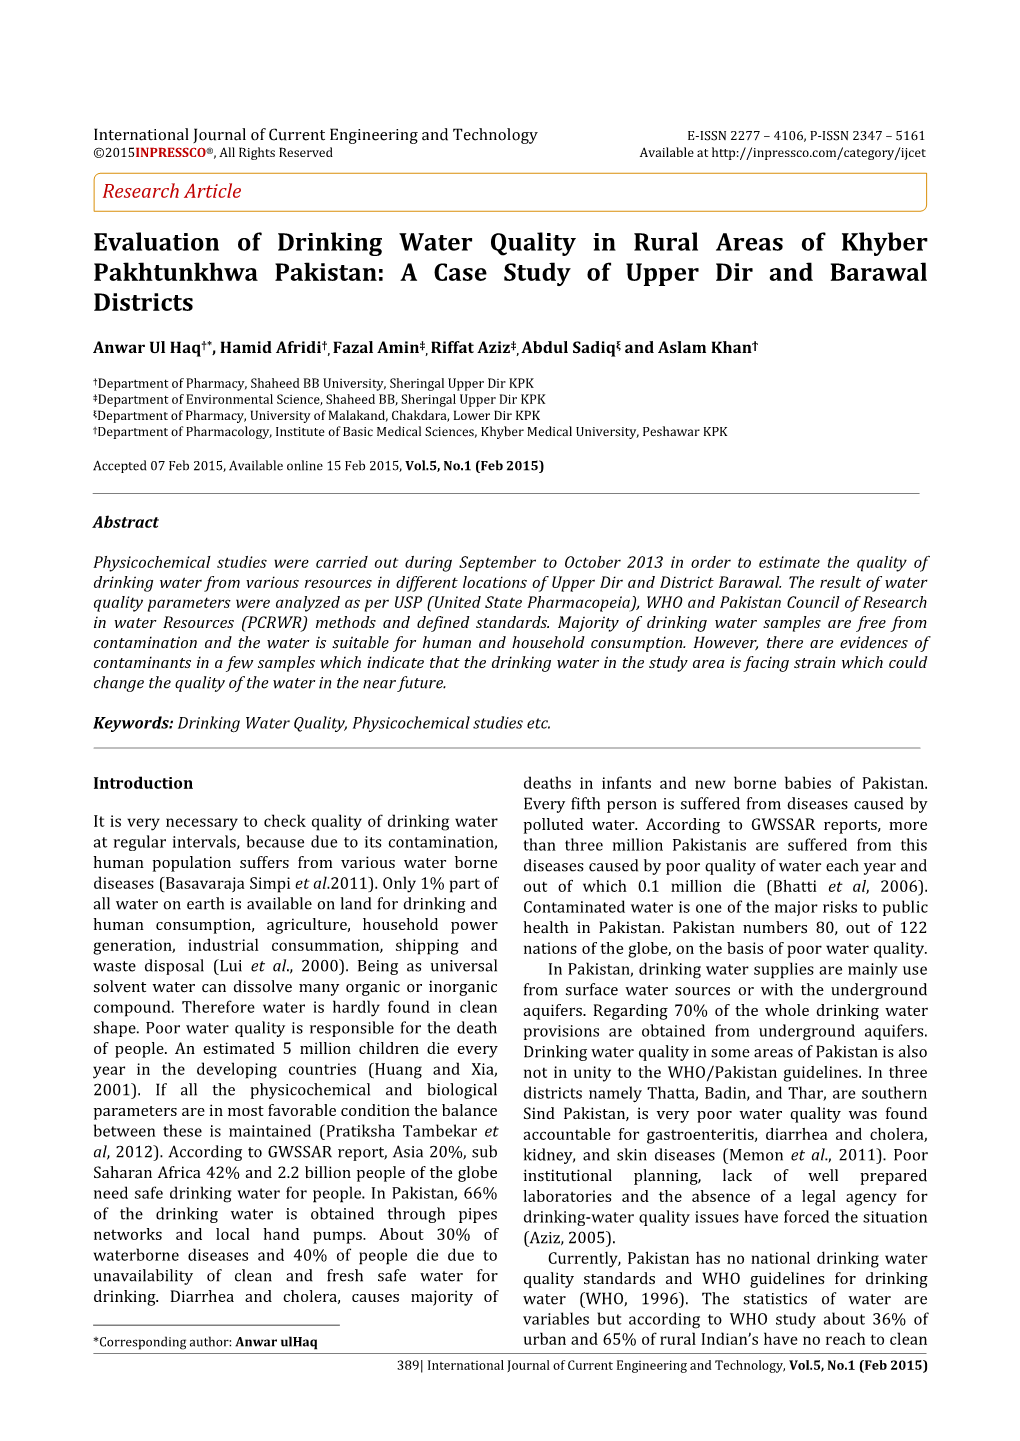 Evaluation of Drinking Water Quality in Rural Areas of Khyber Pakhtunkhwa Pakistan: a Case Study of Upper Dir and Barawal Districts